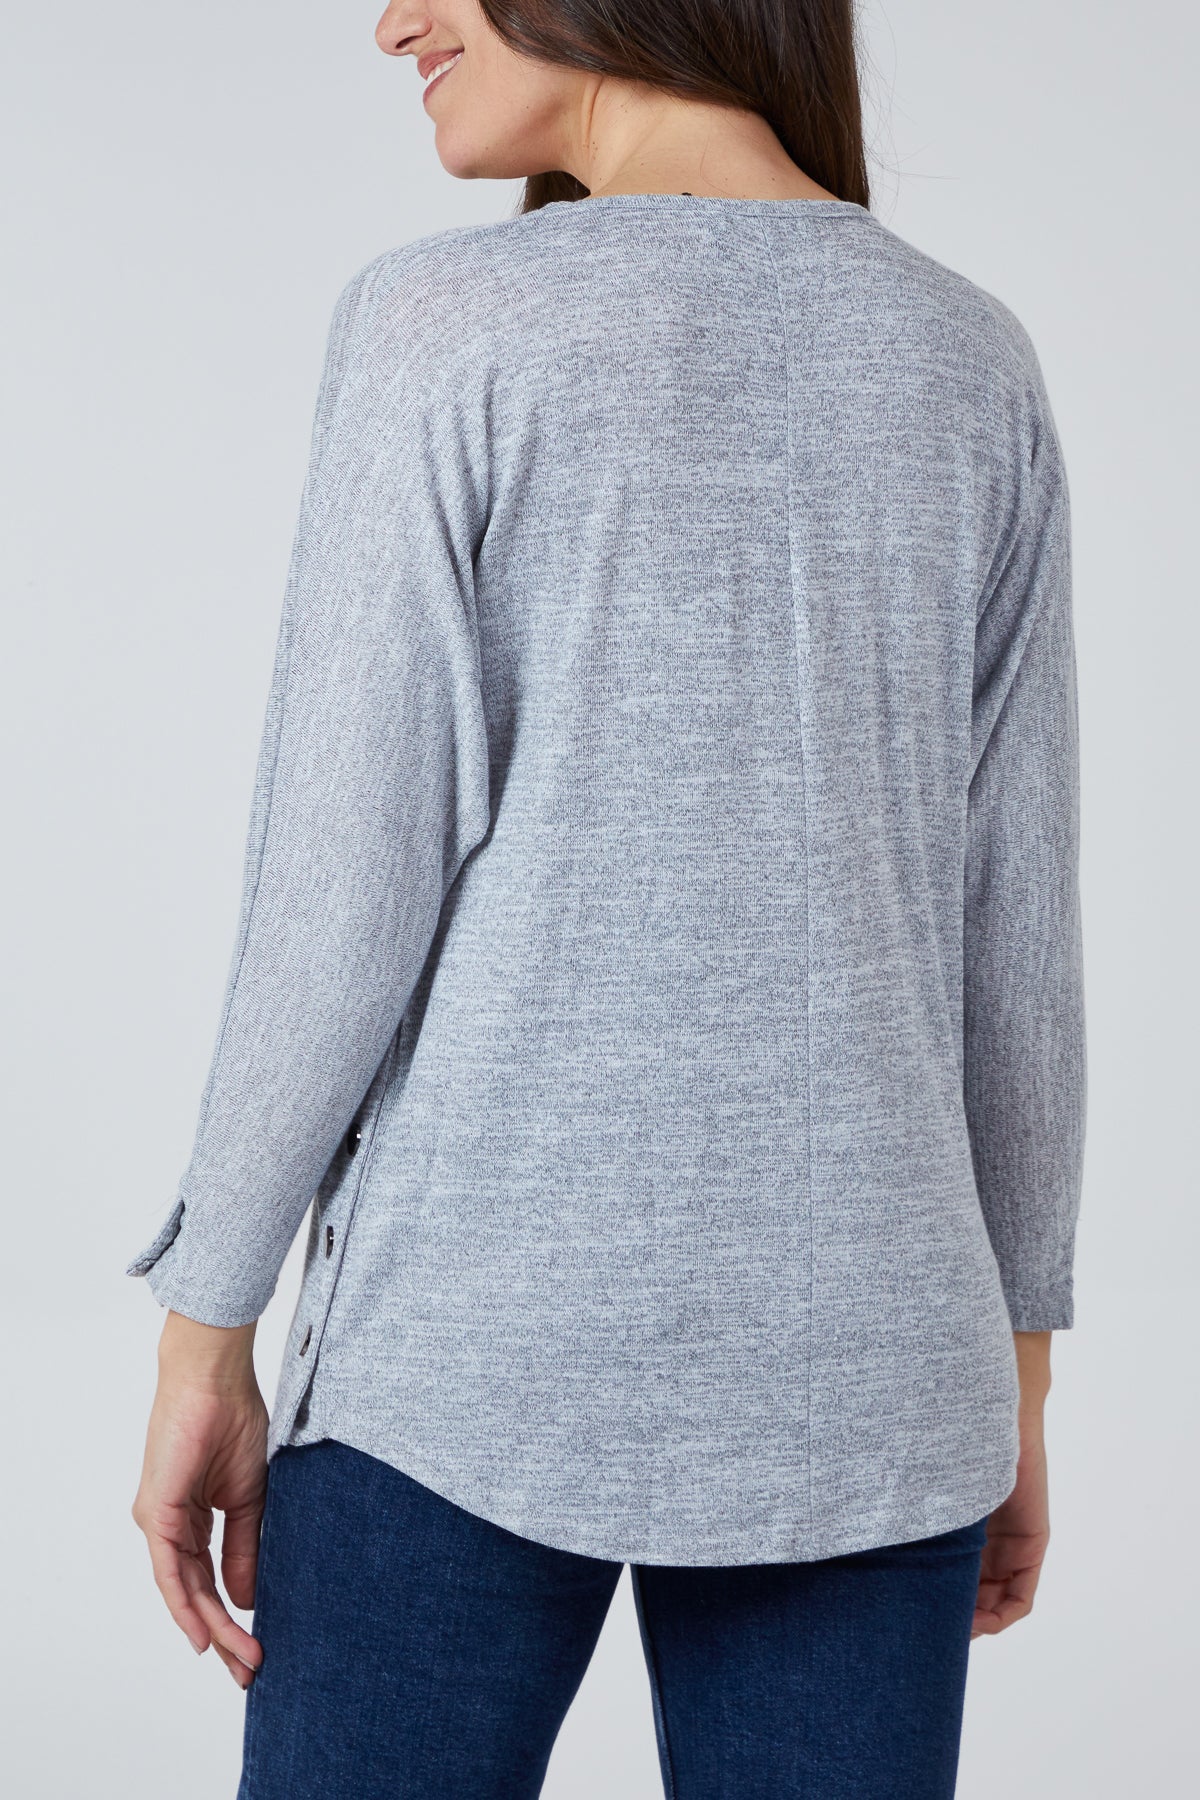 Snap Side Batwing Top